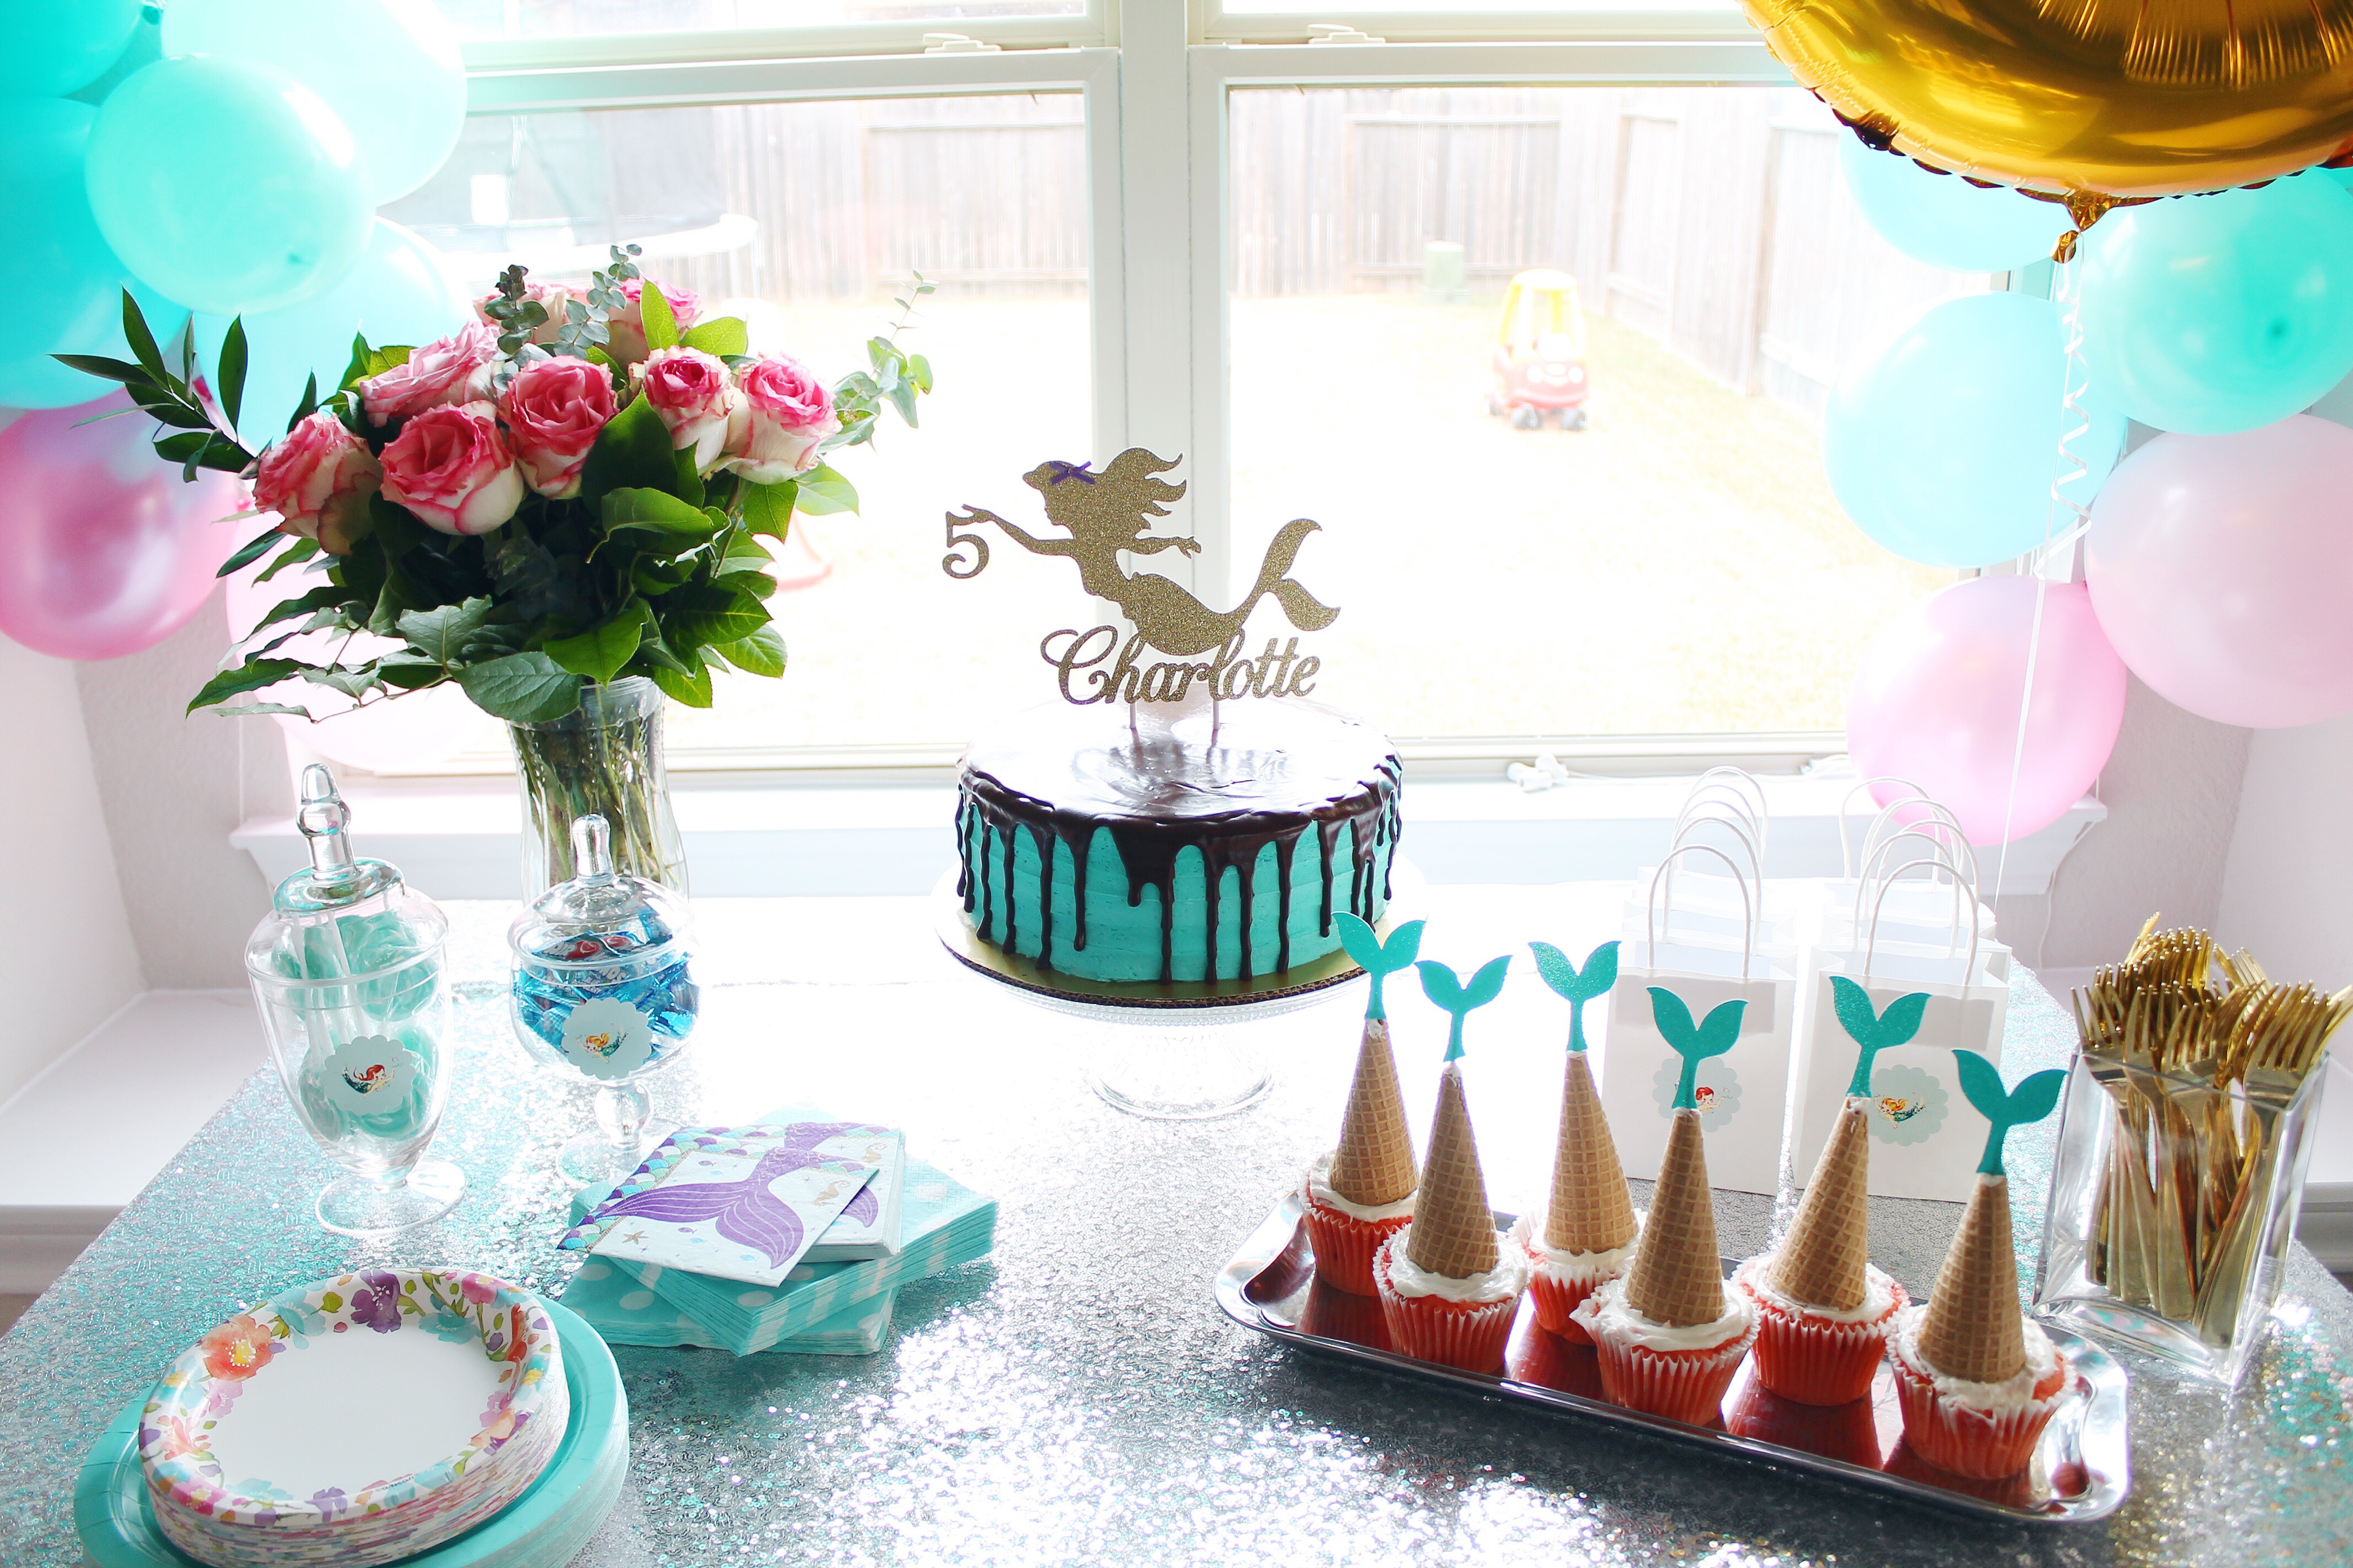 Mermaid Inspired Birthday Party. DIY balloon arch and all the other details for the perfect mermaid party! #birthdayparty #birthdaypartydecor #partydecor